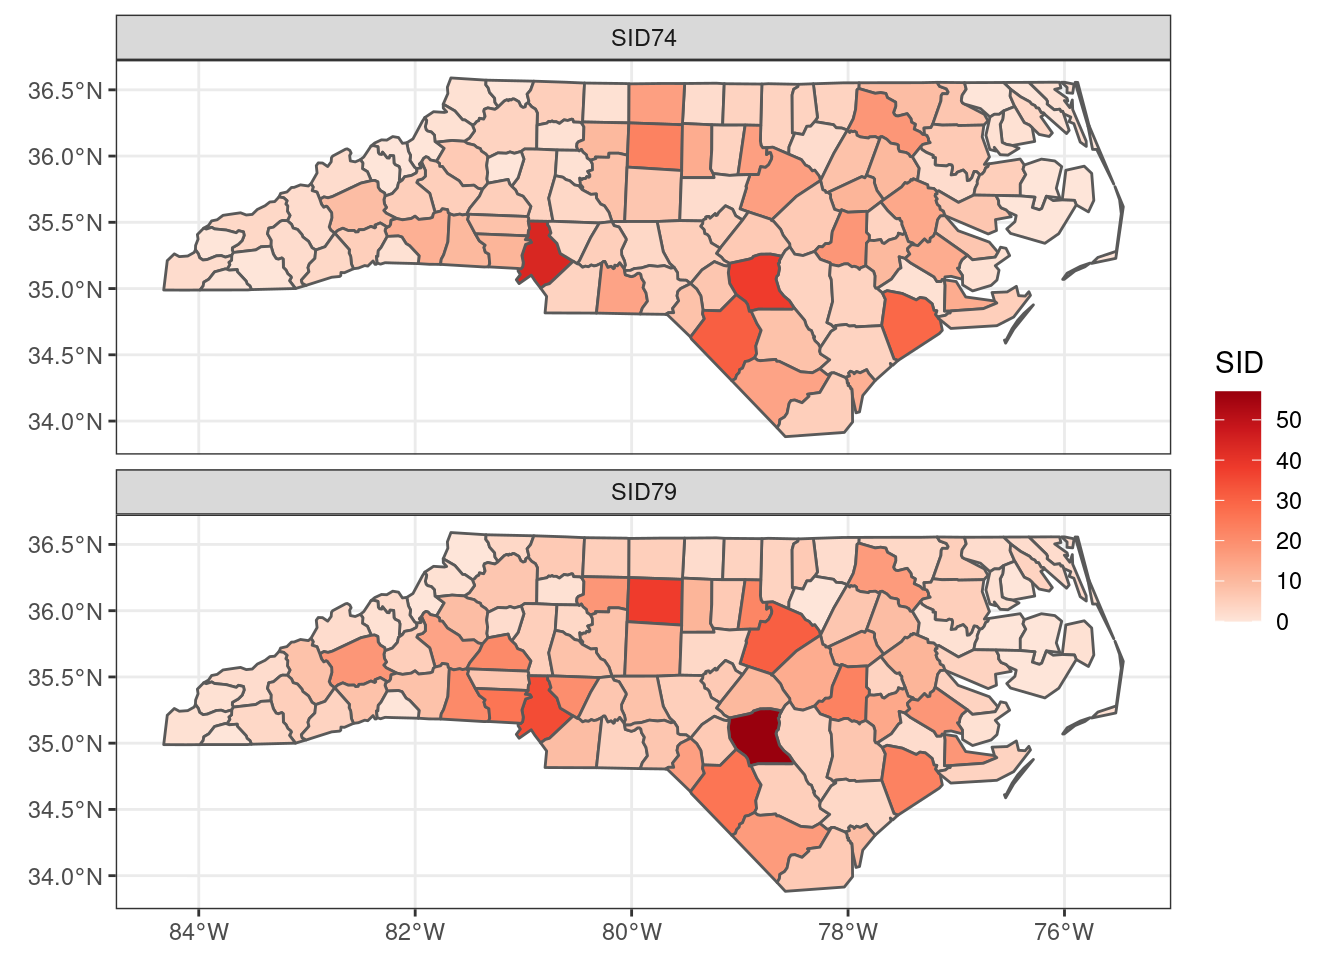 A map with facets for different attributes, using the `ggplot2` package